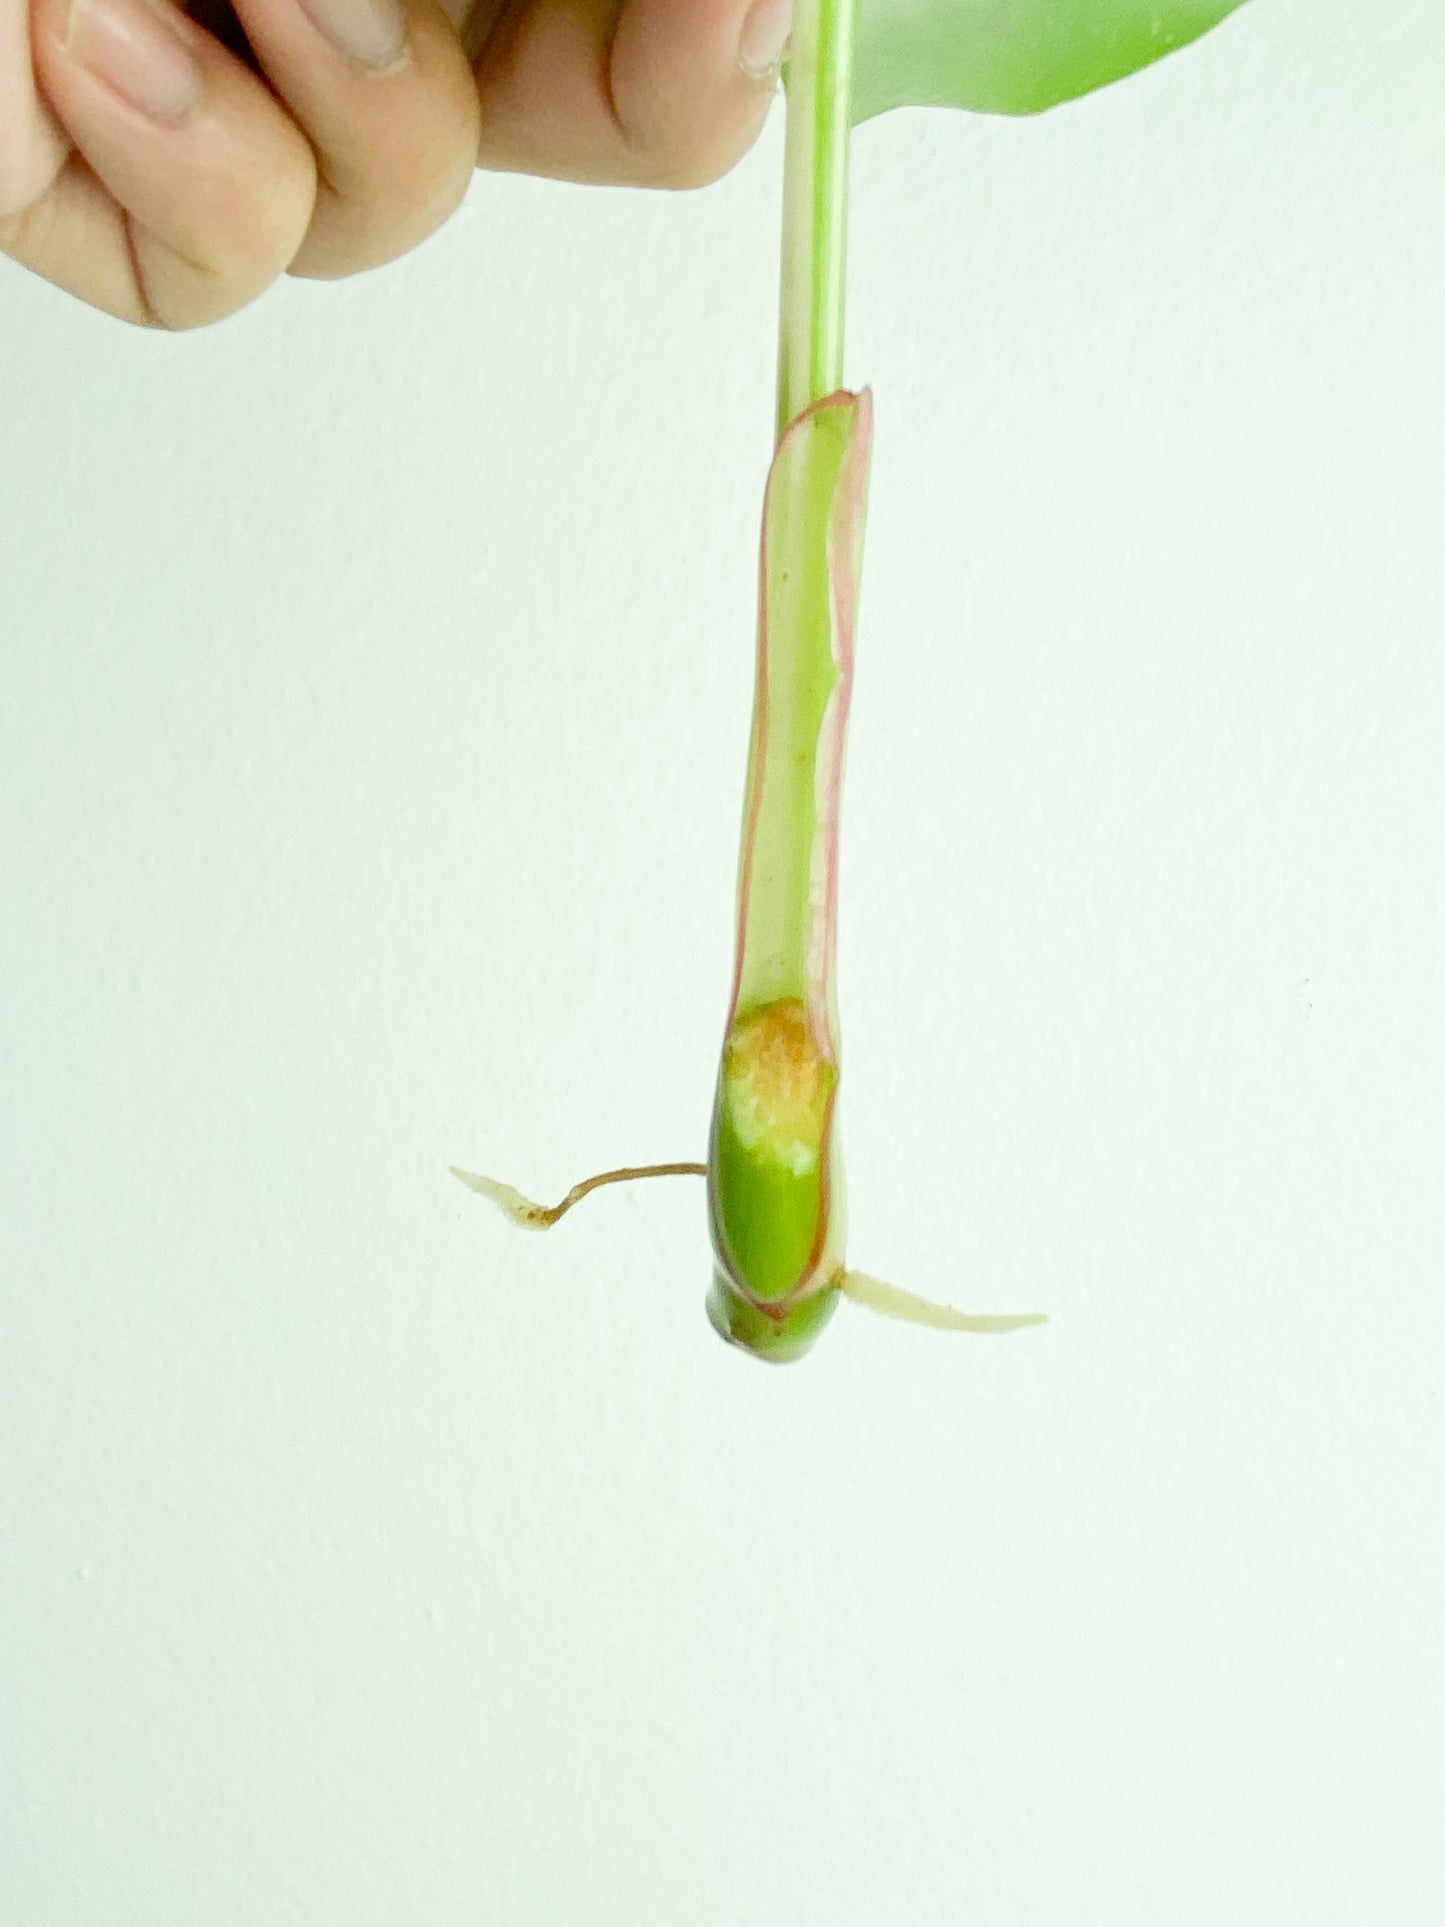 Philodendron White Princess rooting Cutting  (Currently in sphagnum moss)